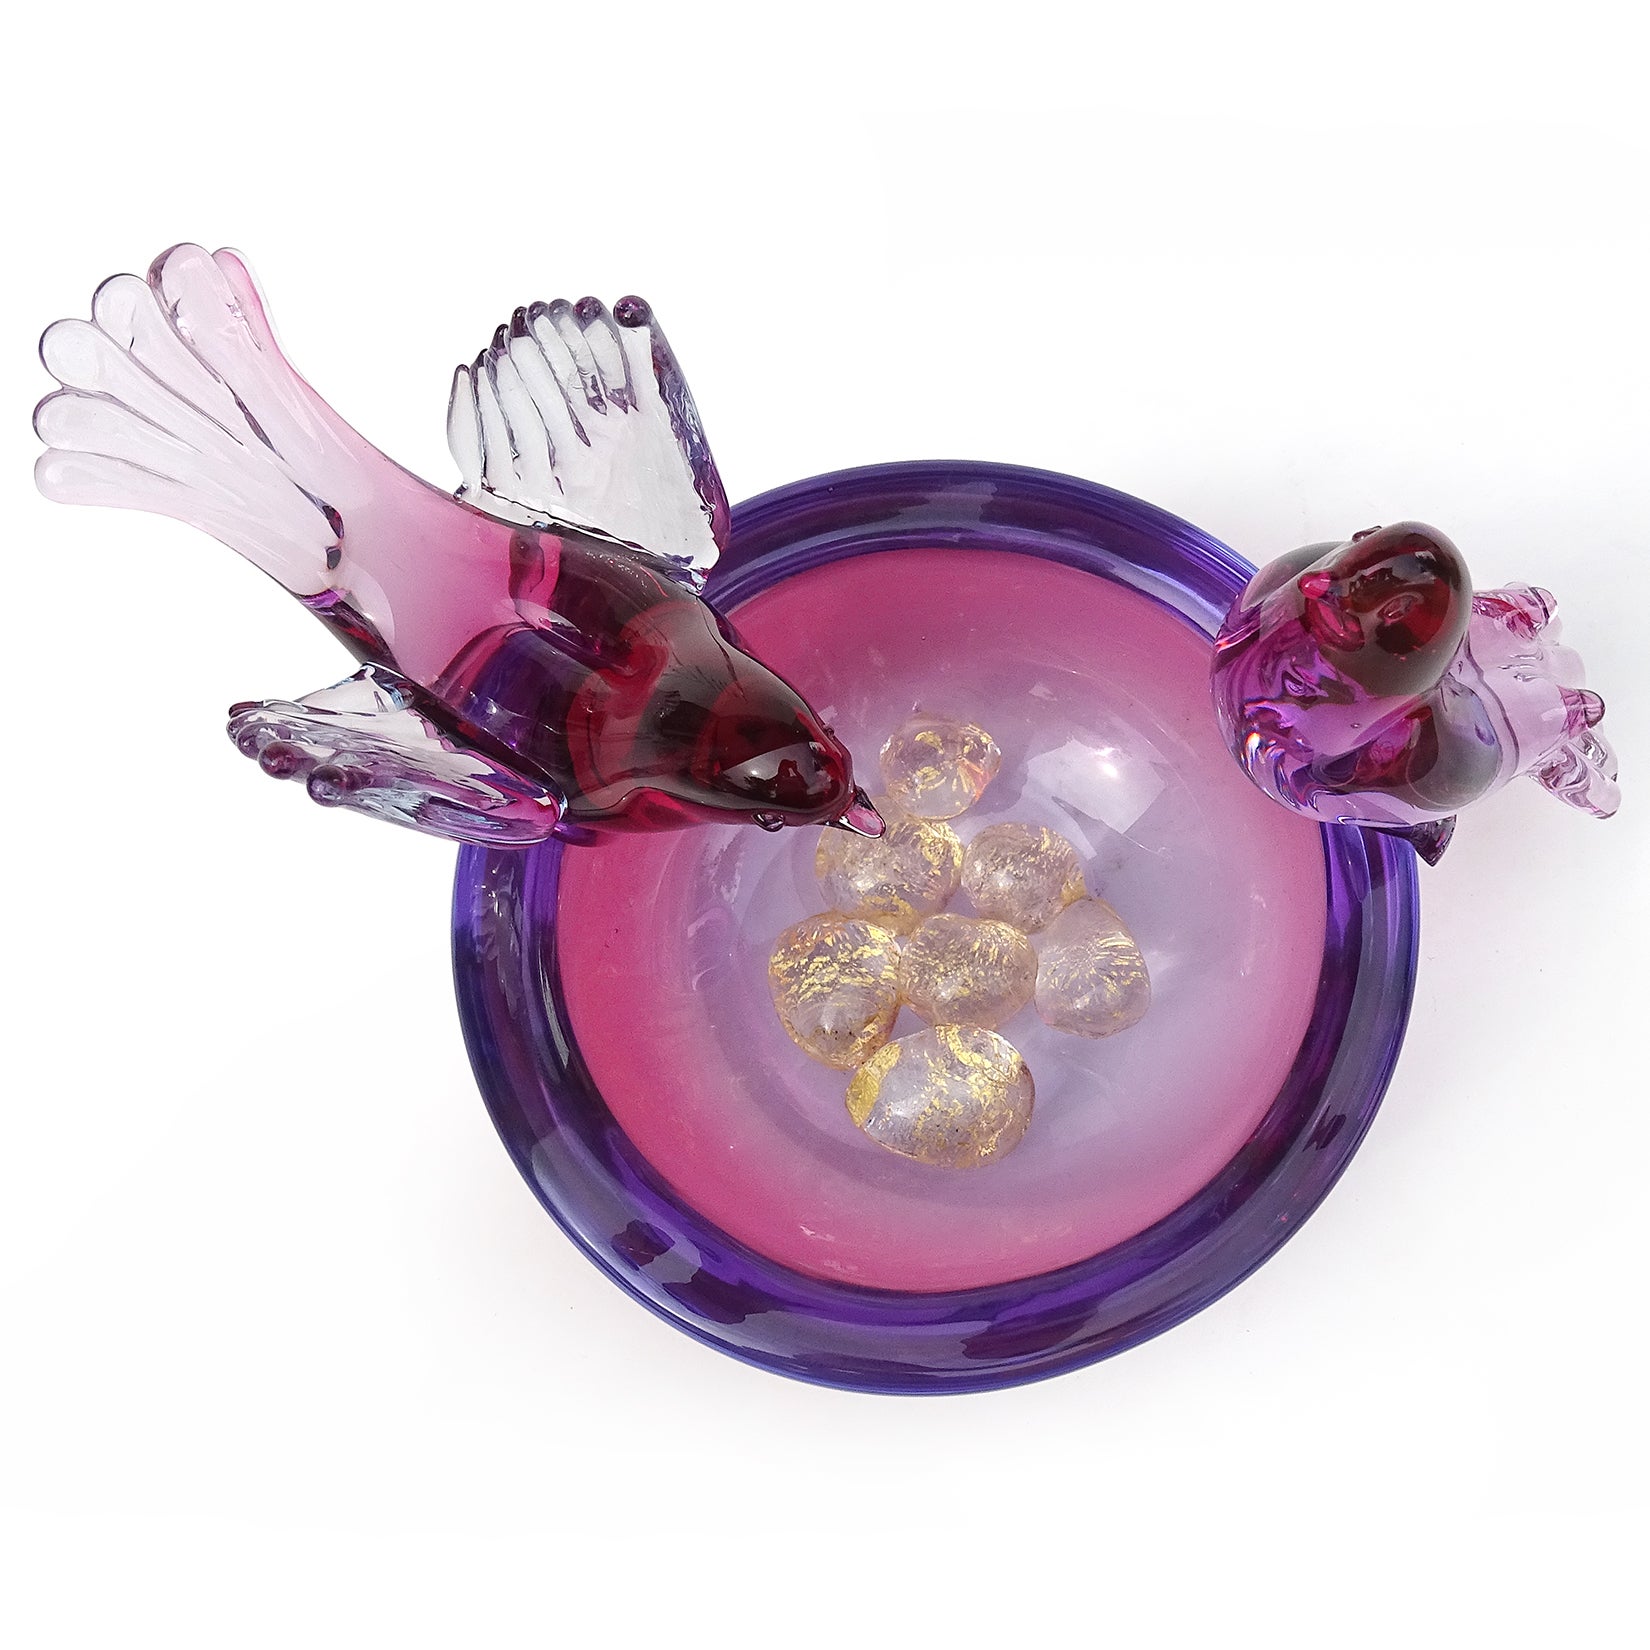 Beautiful vintage Murano hand blown Sommerso red, amethyst purple, light blue and gold flecks Italian art glass birds on bowl, looking over their nest with eggs. Attributed to the Salviati company, and designer Alfredo Barbini. The male and female